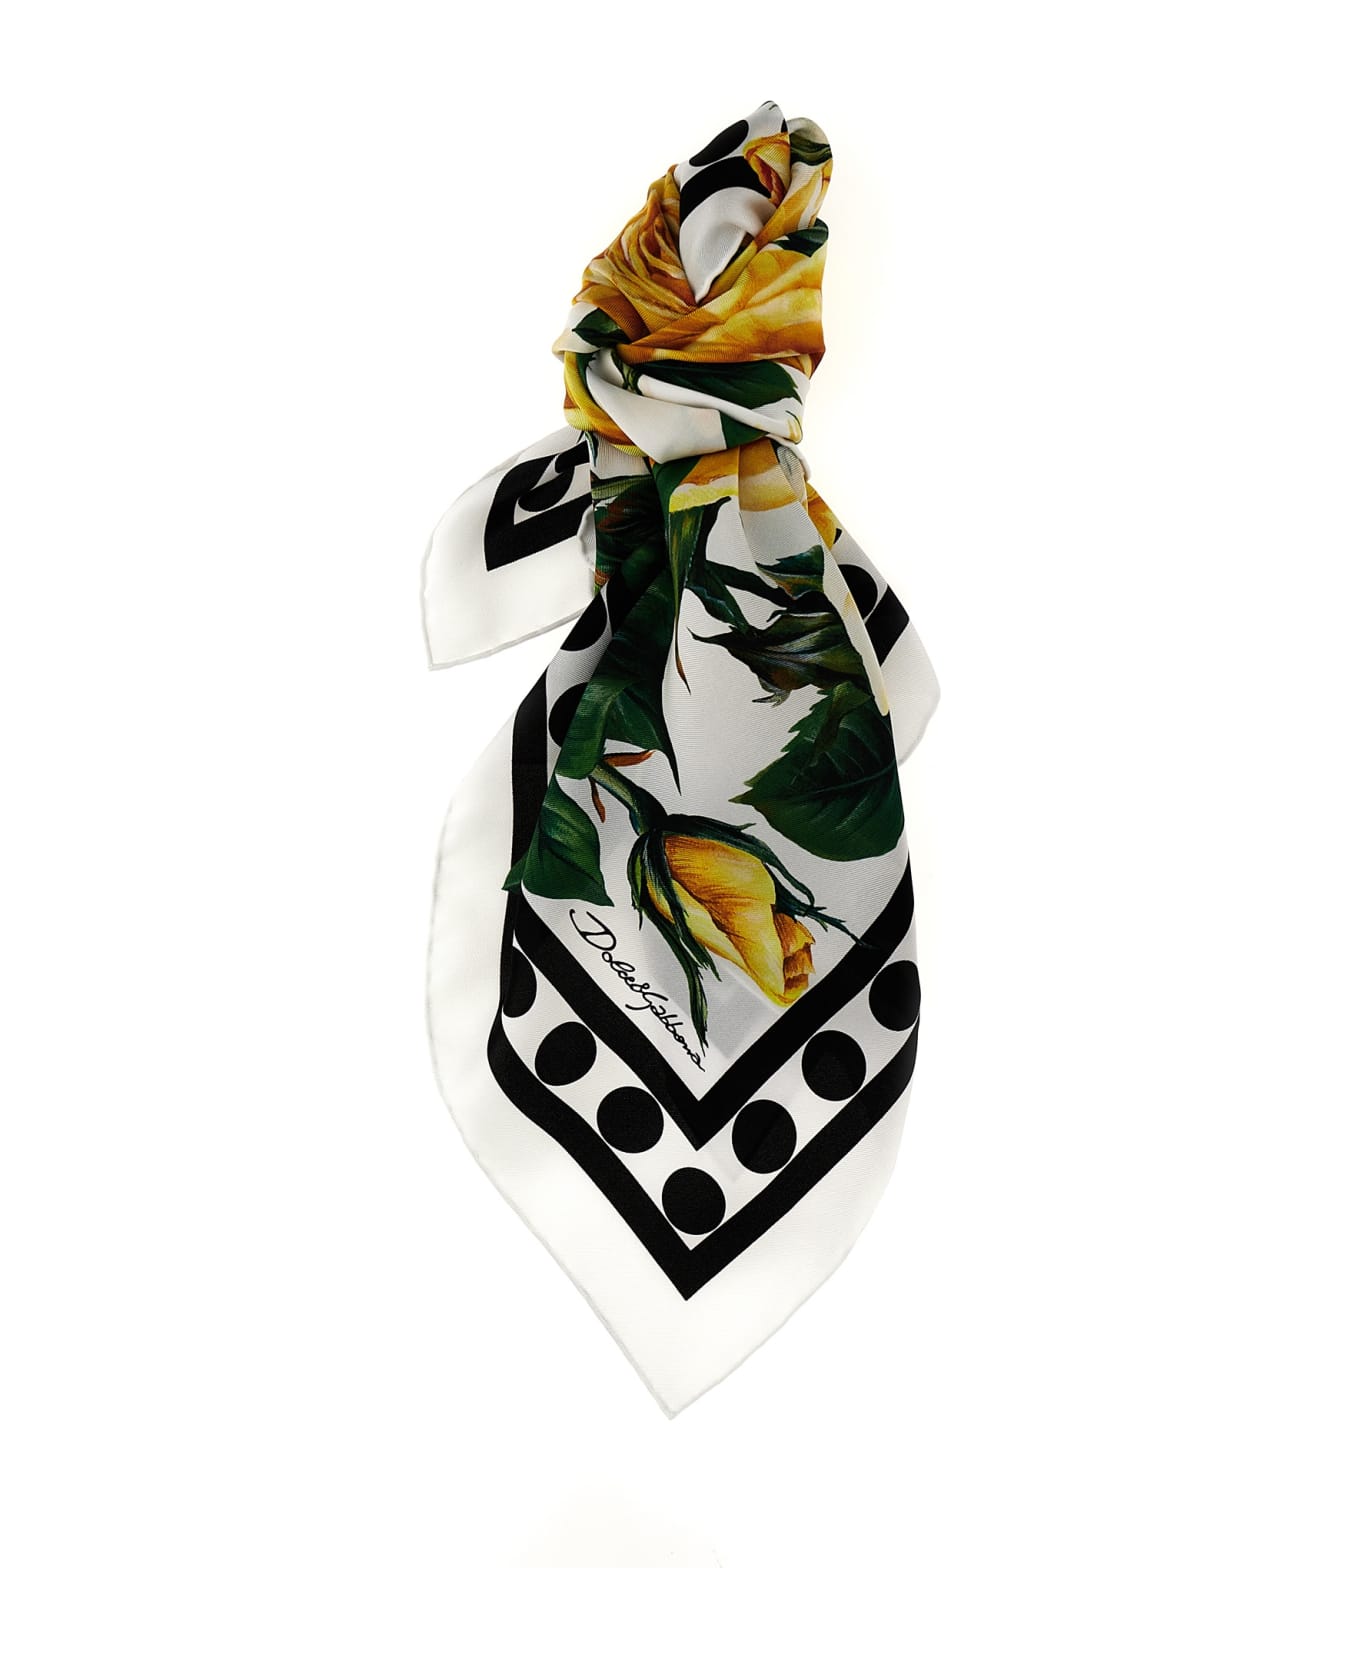 Dolce & Gabbana 'rose Gialle' Scarf - Multicolor